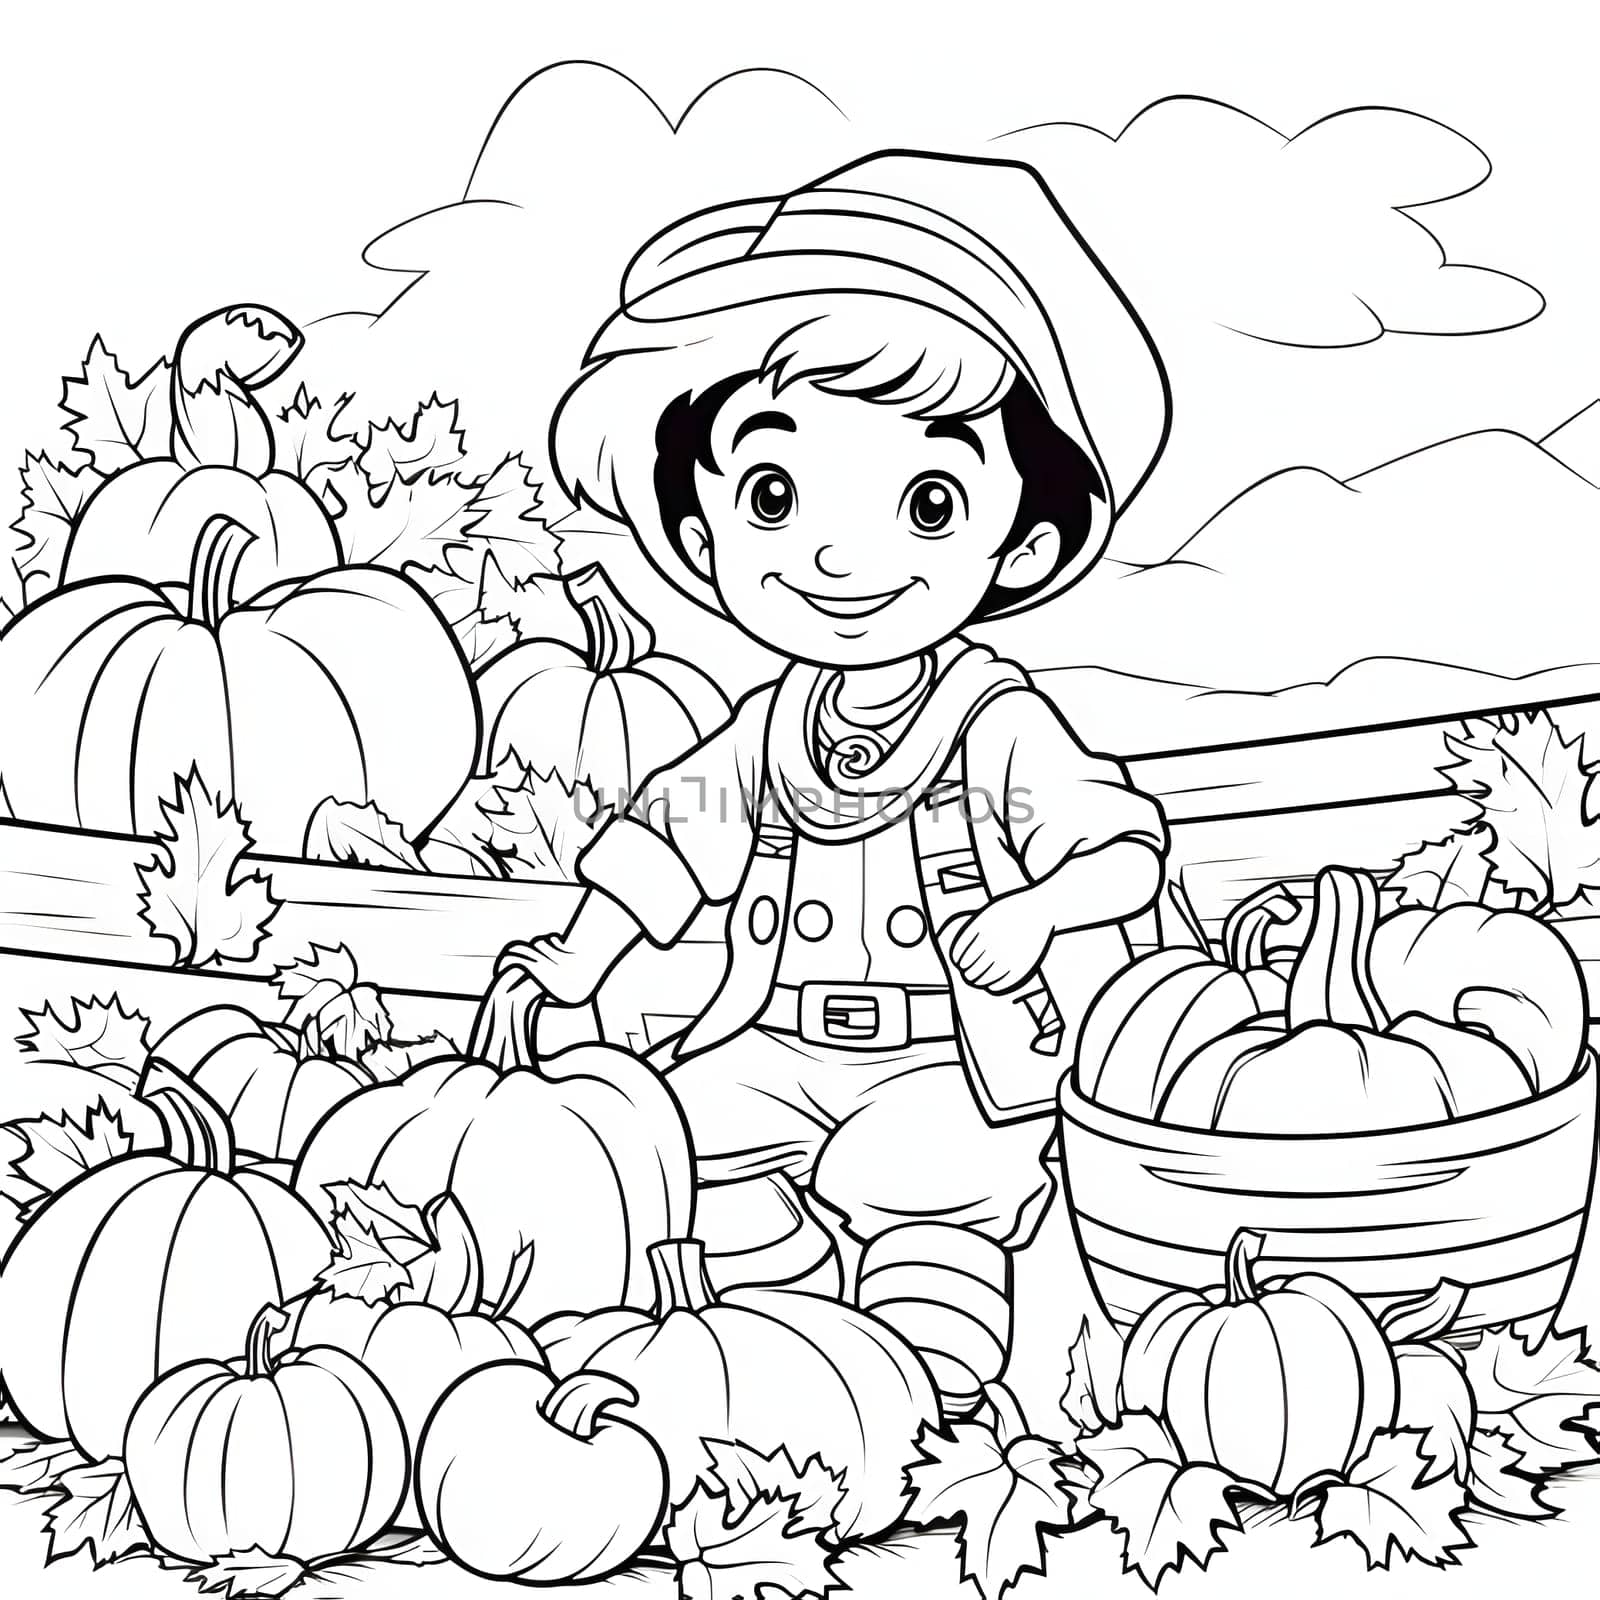 Black and white coloring sheet happy smiling boy with pumpkins. Pumpkin as a dish of thanksgiving for the harvest, picture on a white isolated background. An atmosphere of joy and celebration.